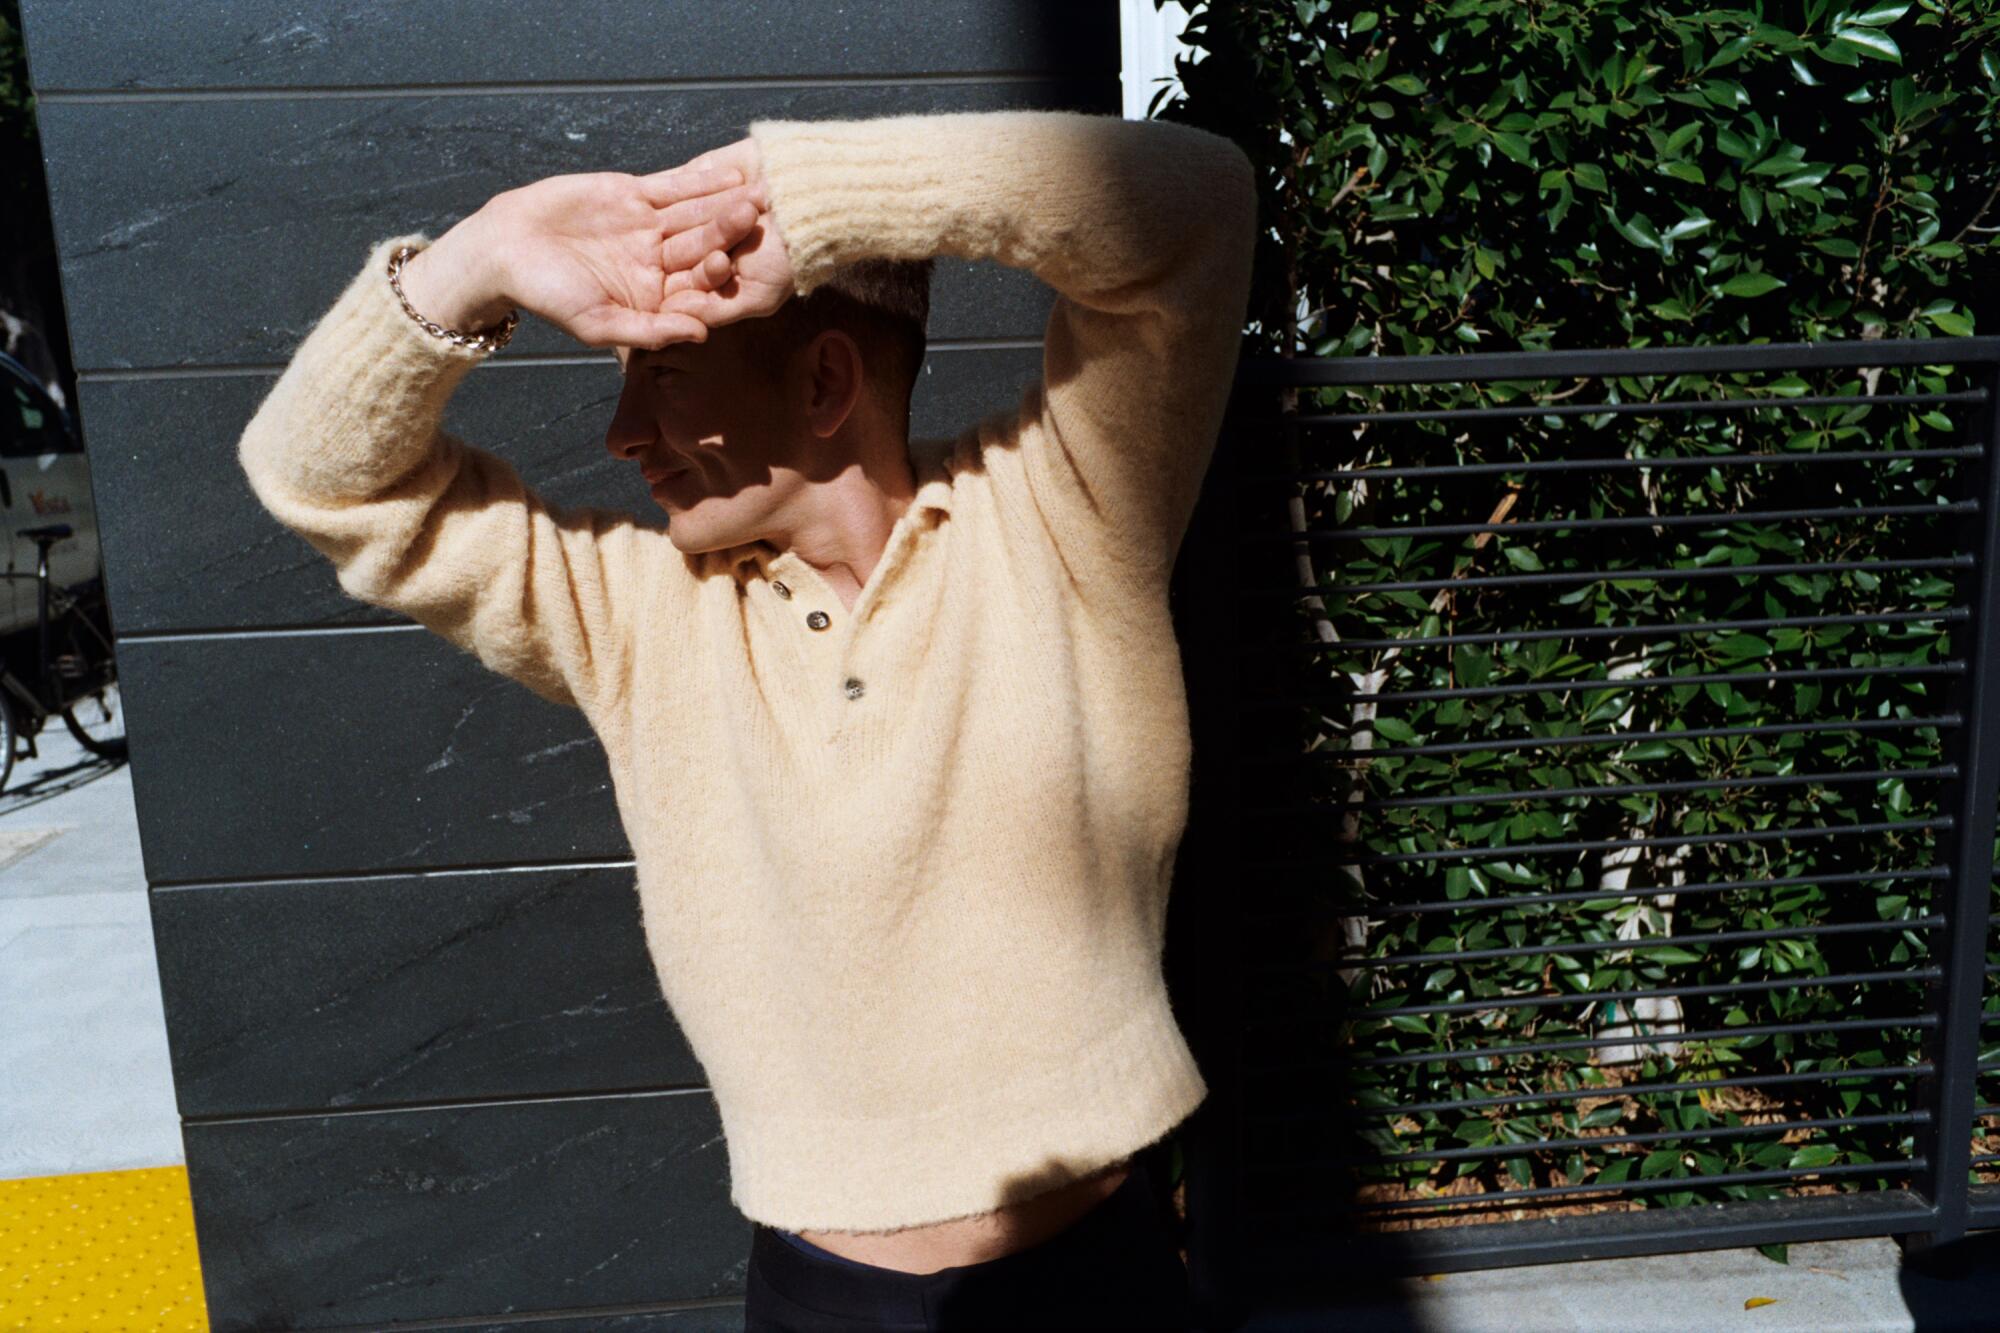 A man in a tan sweater shields his eyes from the sun with his hands, casting a dark shadow on his face.